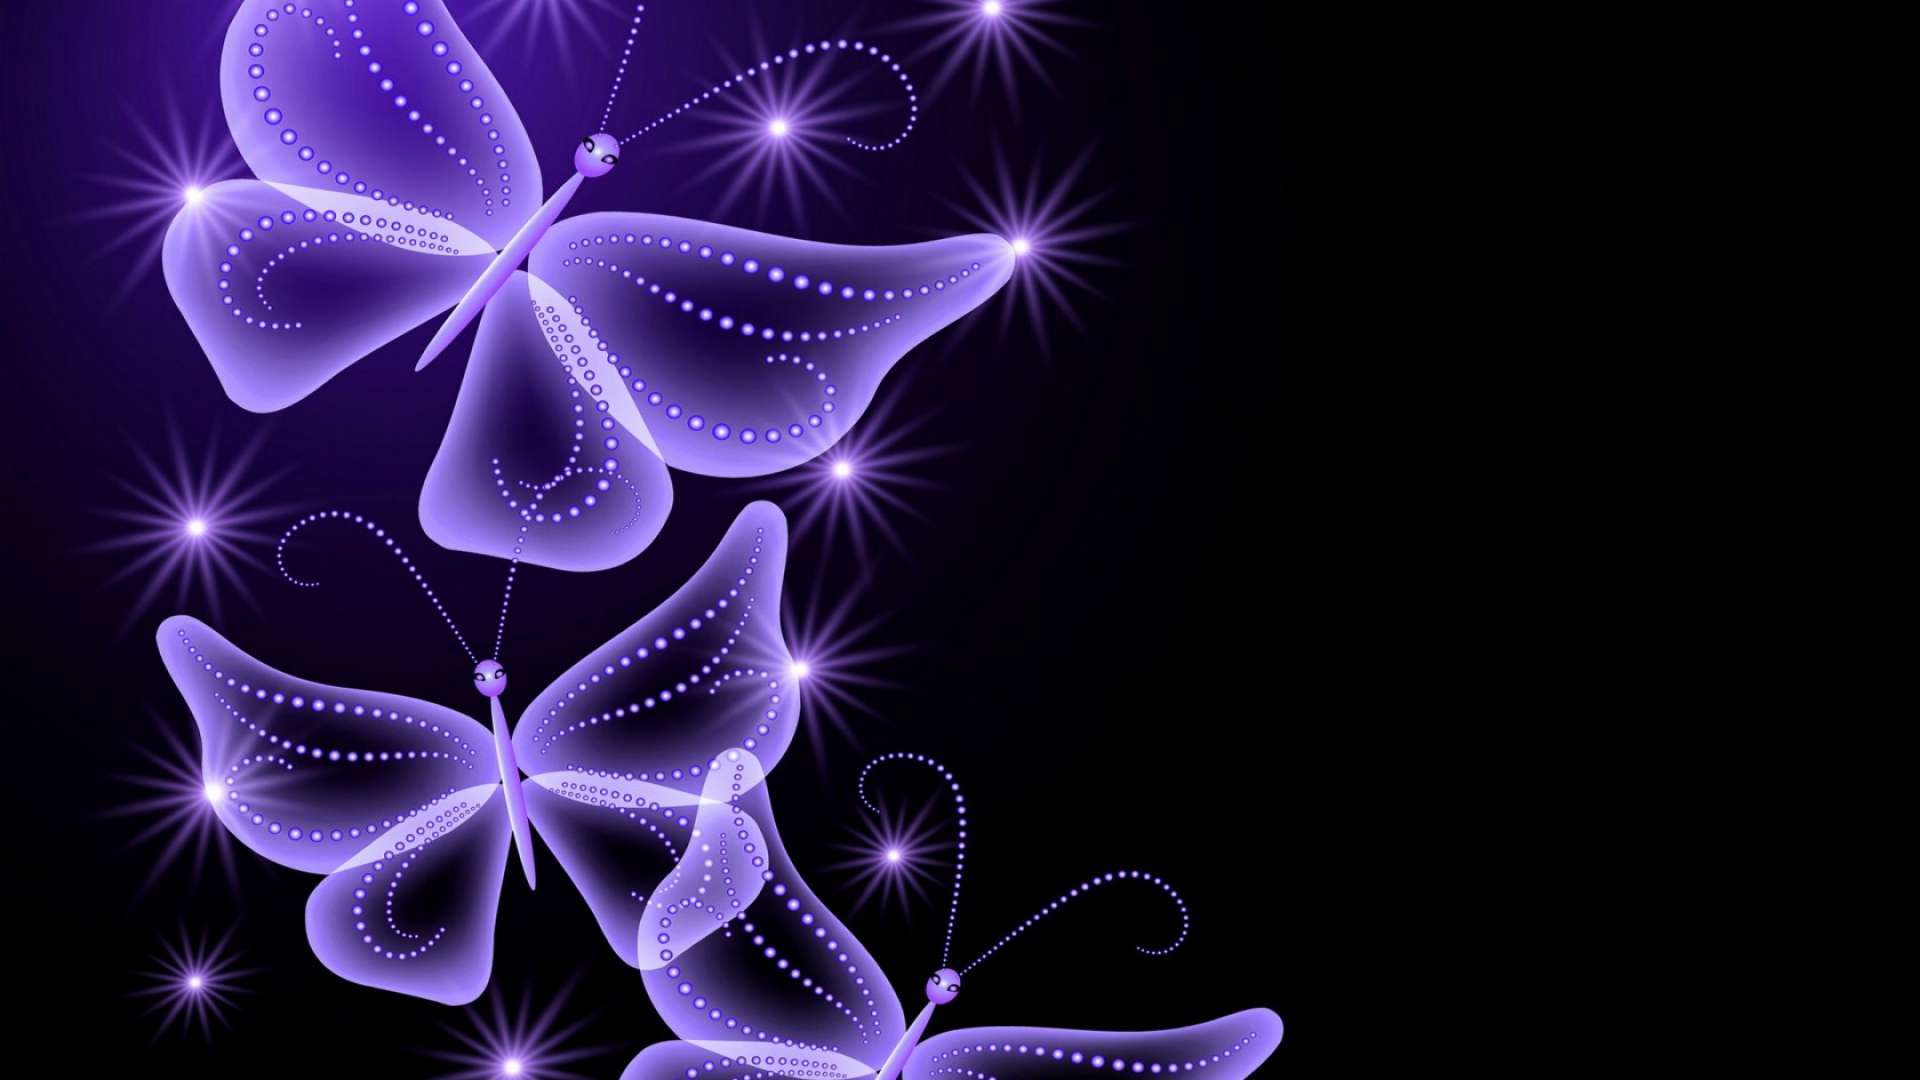 Wallpaper Neon Butterfly HD 1080p Upload At March